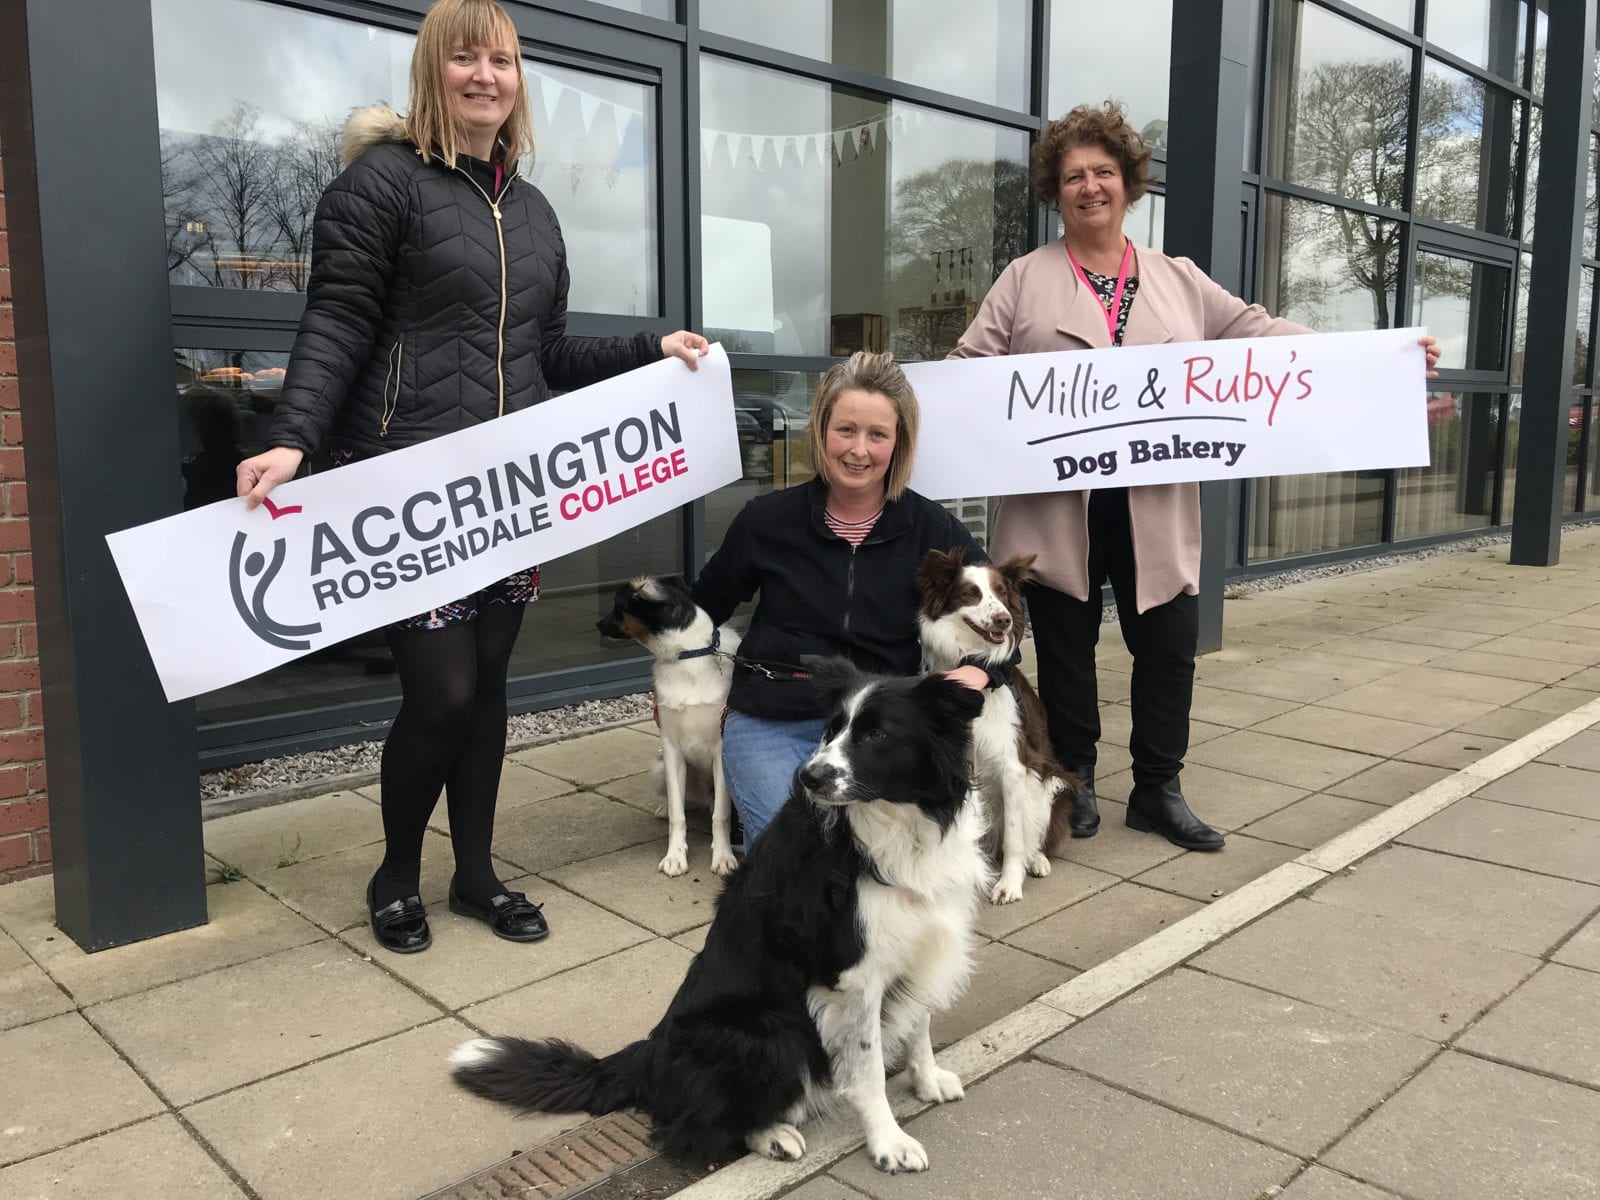 Millie and Ruby’s Dog Bakery’s rescue accrington & rossendale college